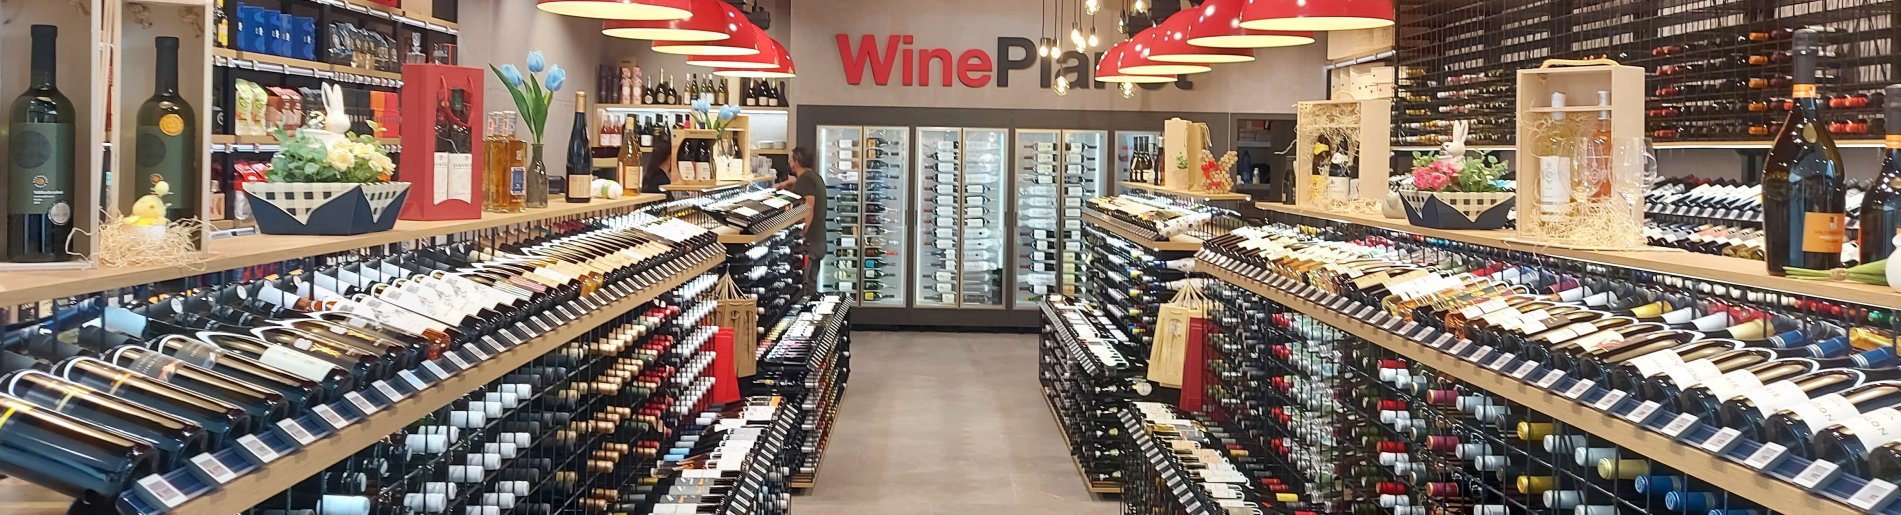 Our wine shops WinePlanet